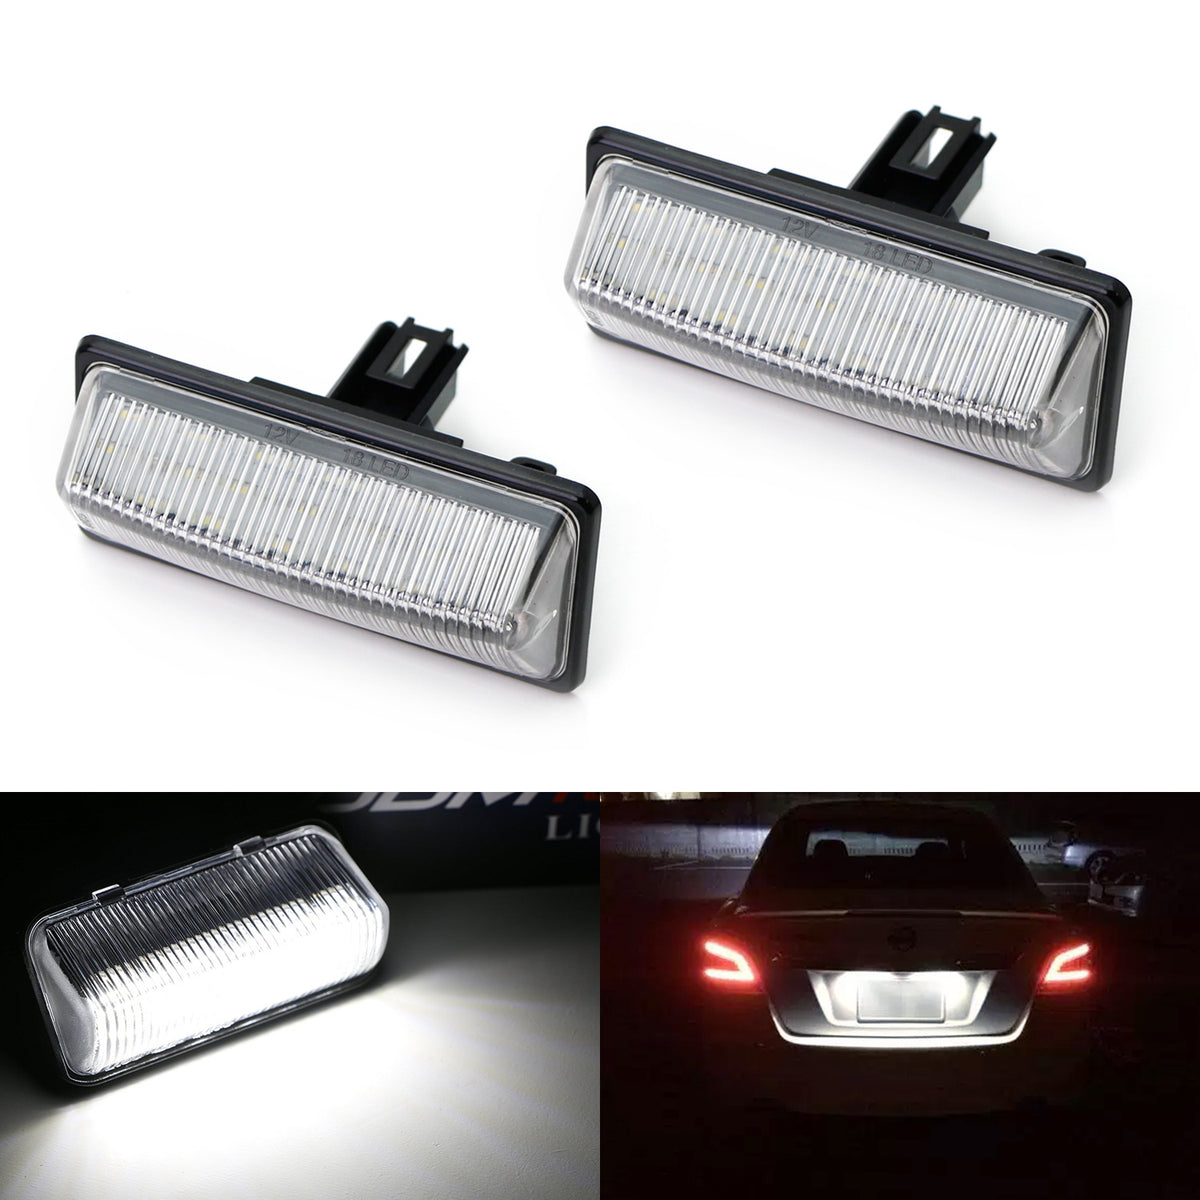  Pair 18 SMD LED Rear Number License Plate Lights for Volvo C30  2008-2013 White : Automotive